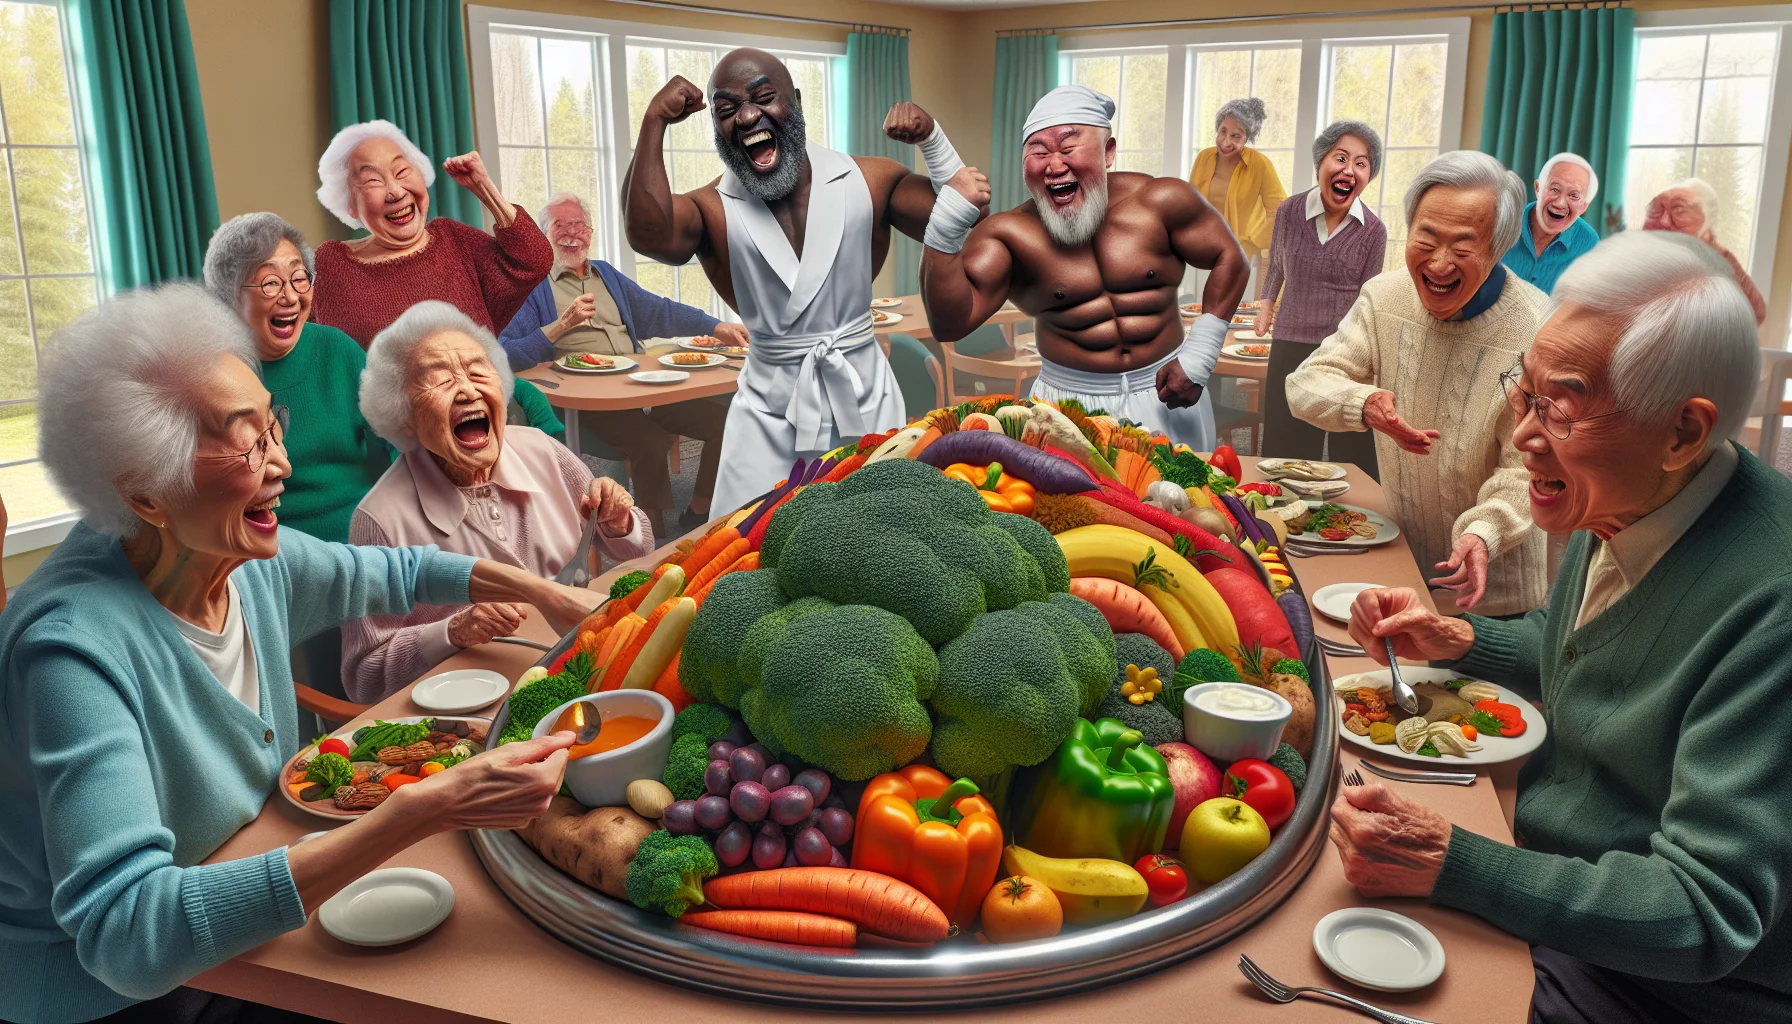 Imagine a hilarious realistic image set in a cozy retirement community's dining room. Several playful elderly individuals, a mix of Asian, Black, Caucasian, and Hispanic men and women, are marvelling at a buffet table packed with a rainbow of anti-inflammatory foods. One lady in particular, a cheerful Middle-Eastern woman, is mock-wrestling with a giant broccoli, while a Caucasian man humorously poses as if he's performing a ballad for a sweet potato. In the background, a South Asian man is chuckling while reading a 'Detox Diets for Seniors' book. The scene is filled with laughter, lively colors, and the freshness of healthy food.